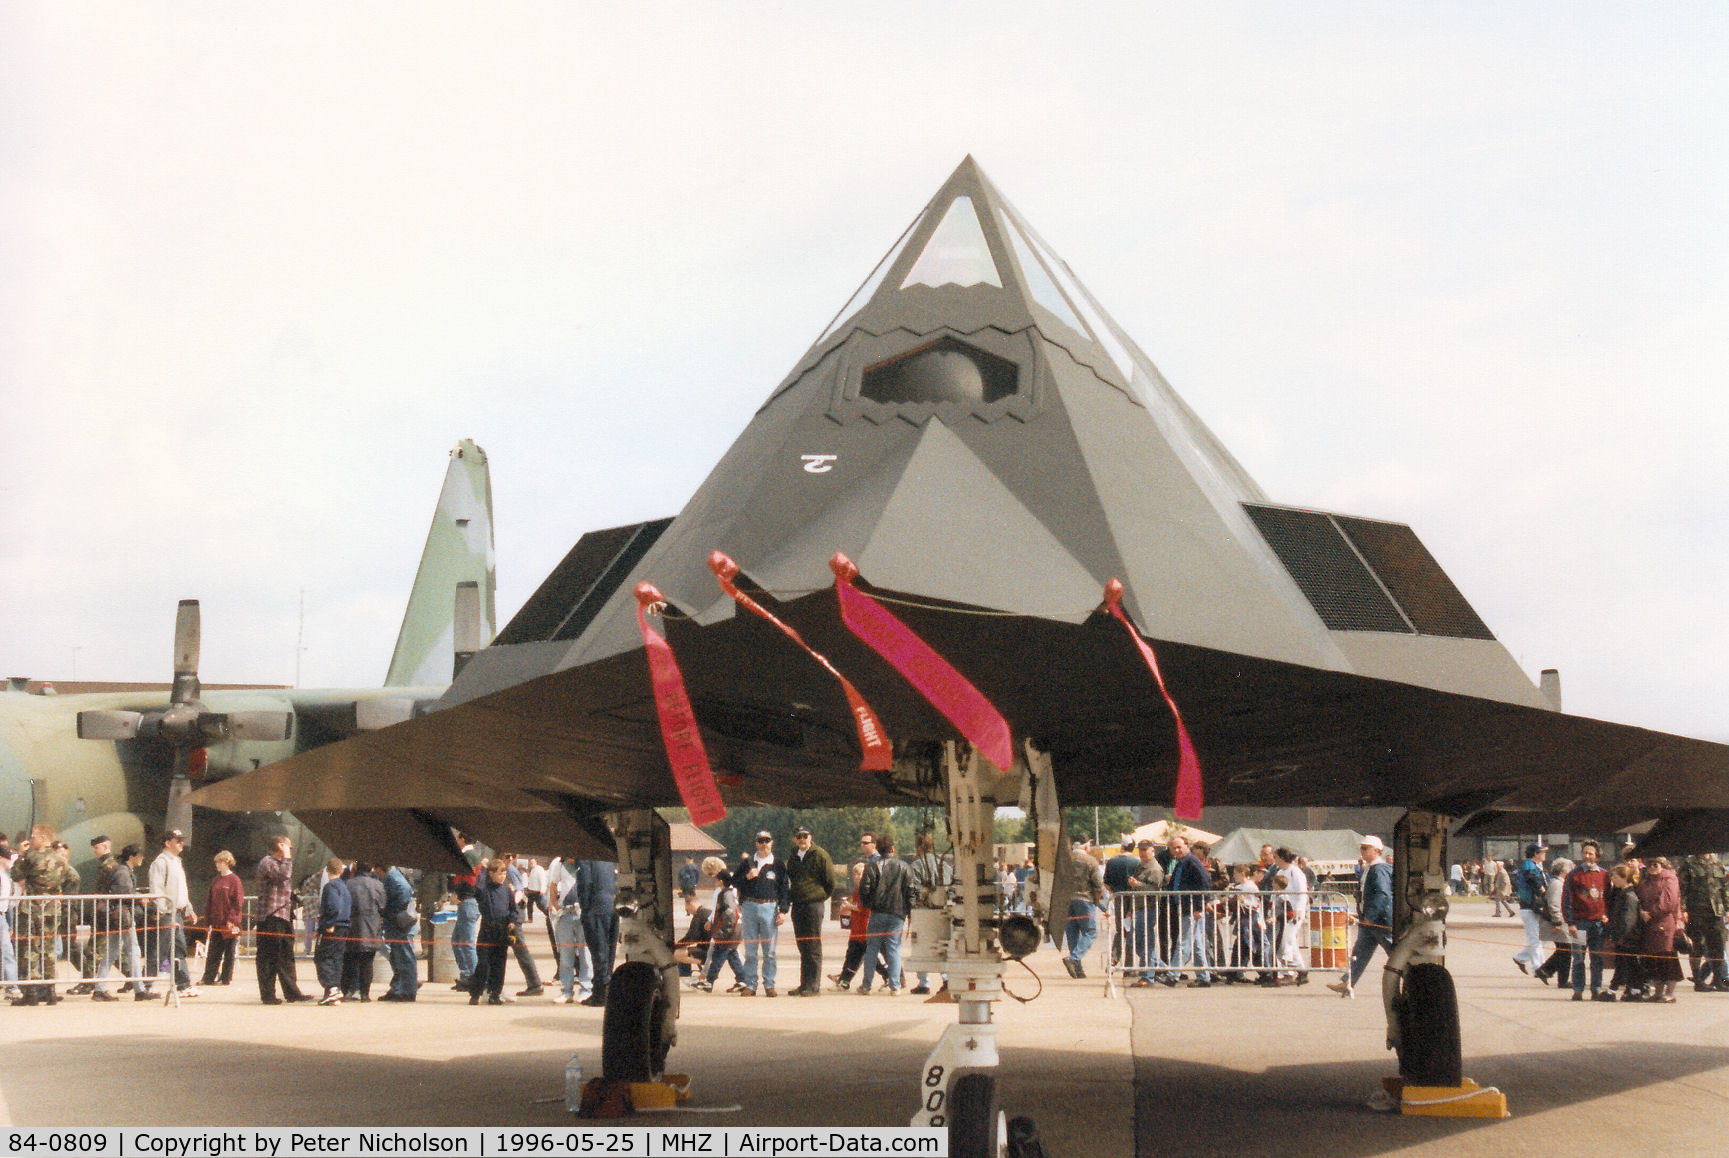 84-0809, 1983 Lockheed F-117A Nighthawk C/N A.4034, Another view of the F-117A Nighthawk of 9th Fighter Squadron/49th Fighter Wing on display at the 1996 RAF Mildenhall Air Fete.